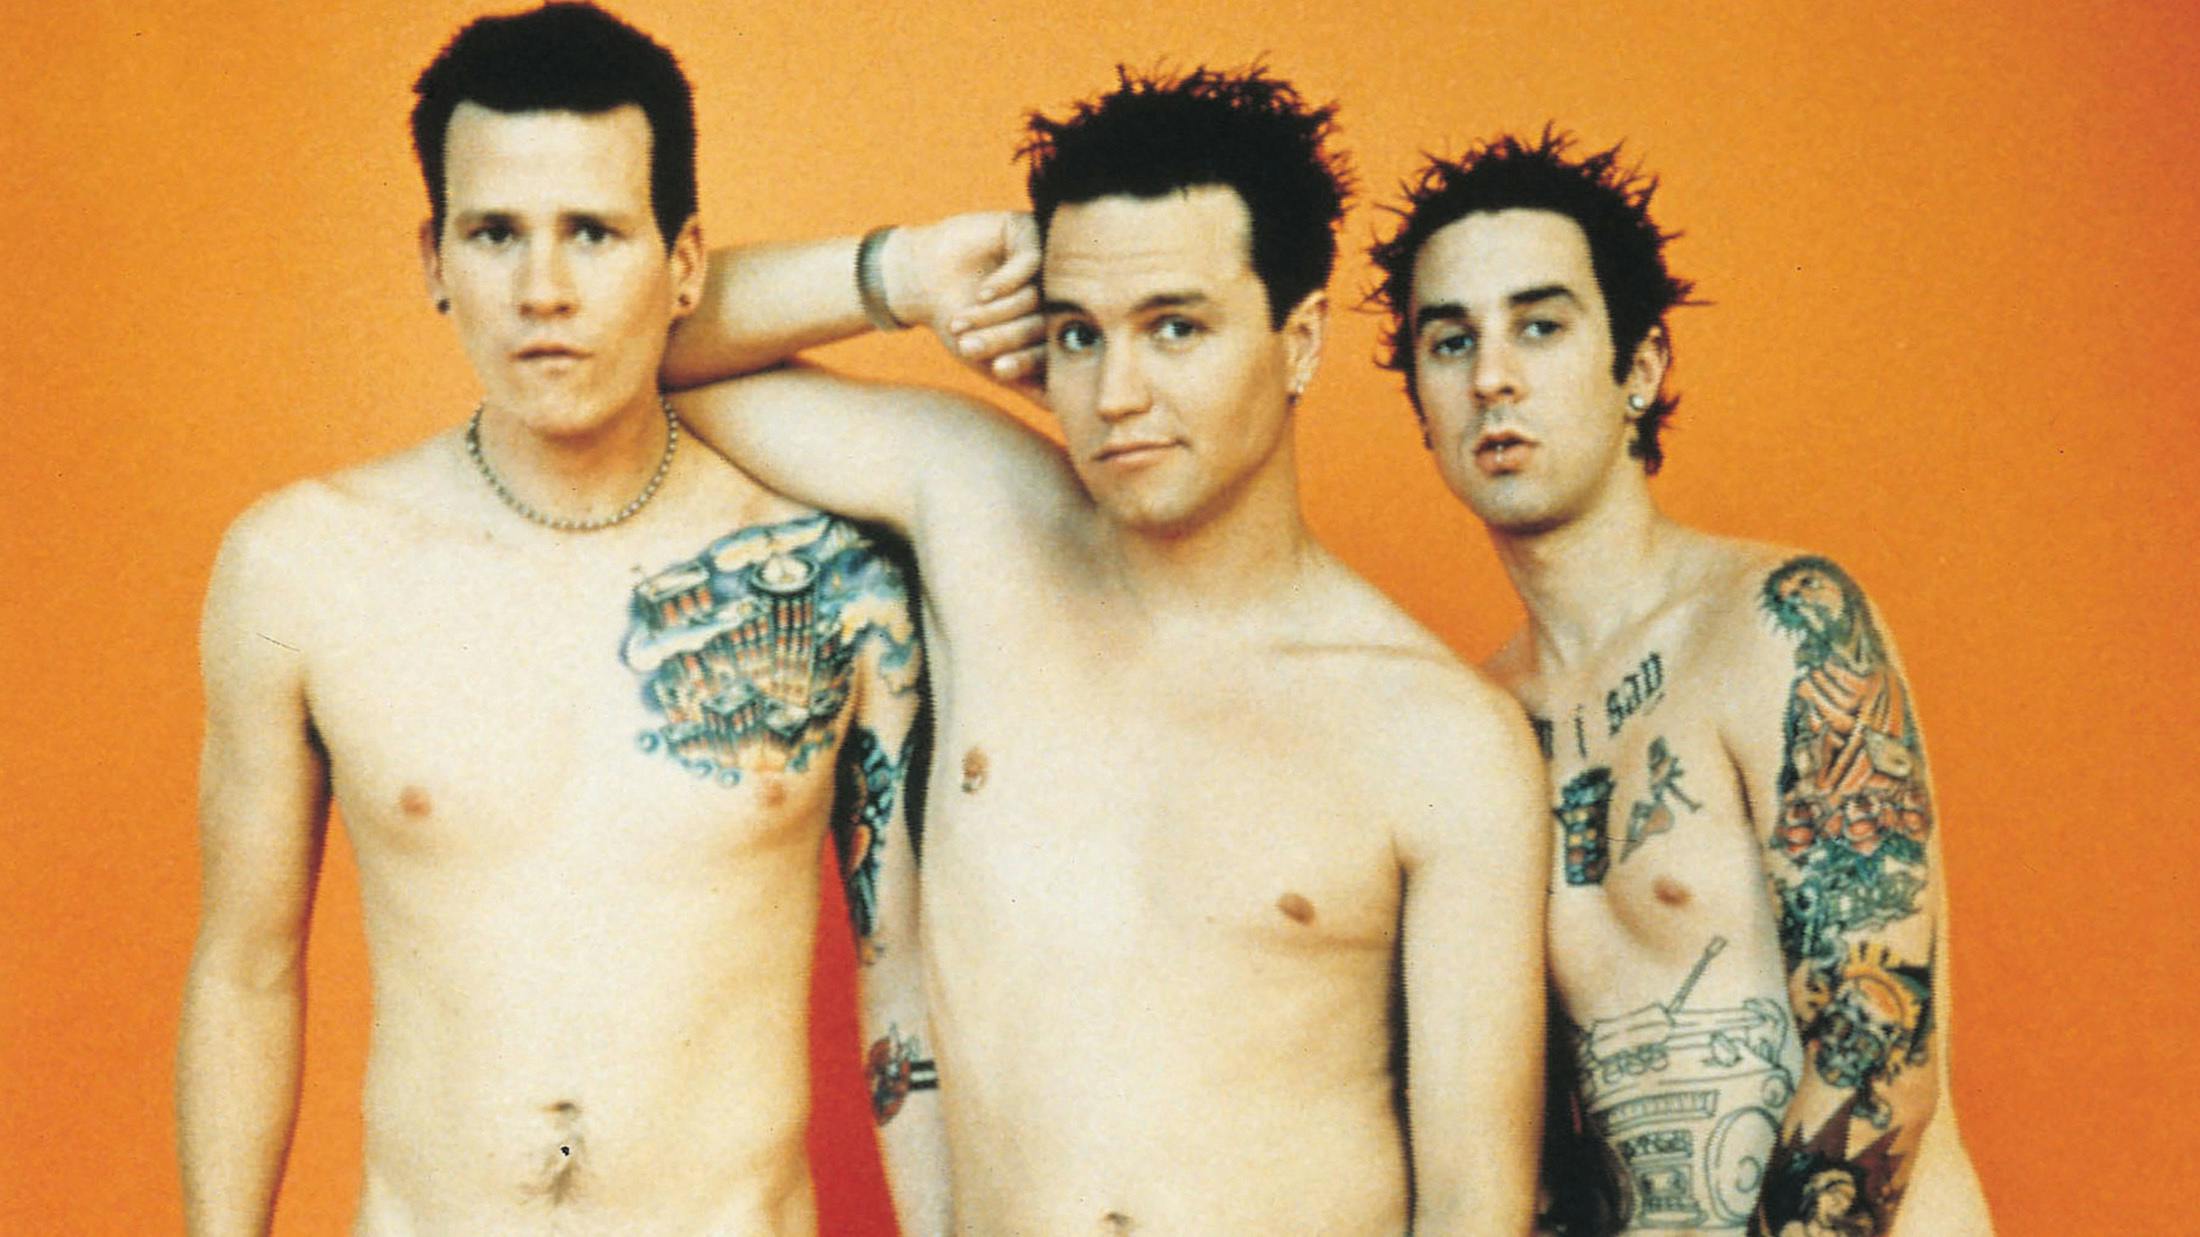 “Being thought of as a joke band is better than an ‘art band’”: The inside story of blink-182’s Enema Of The State